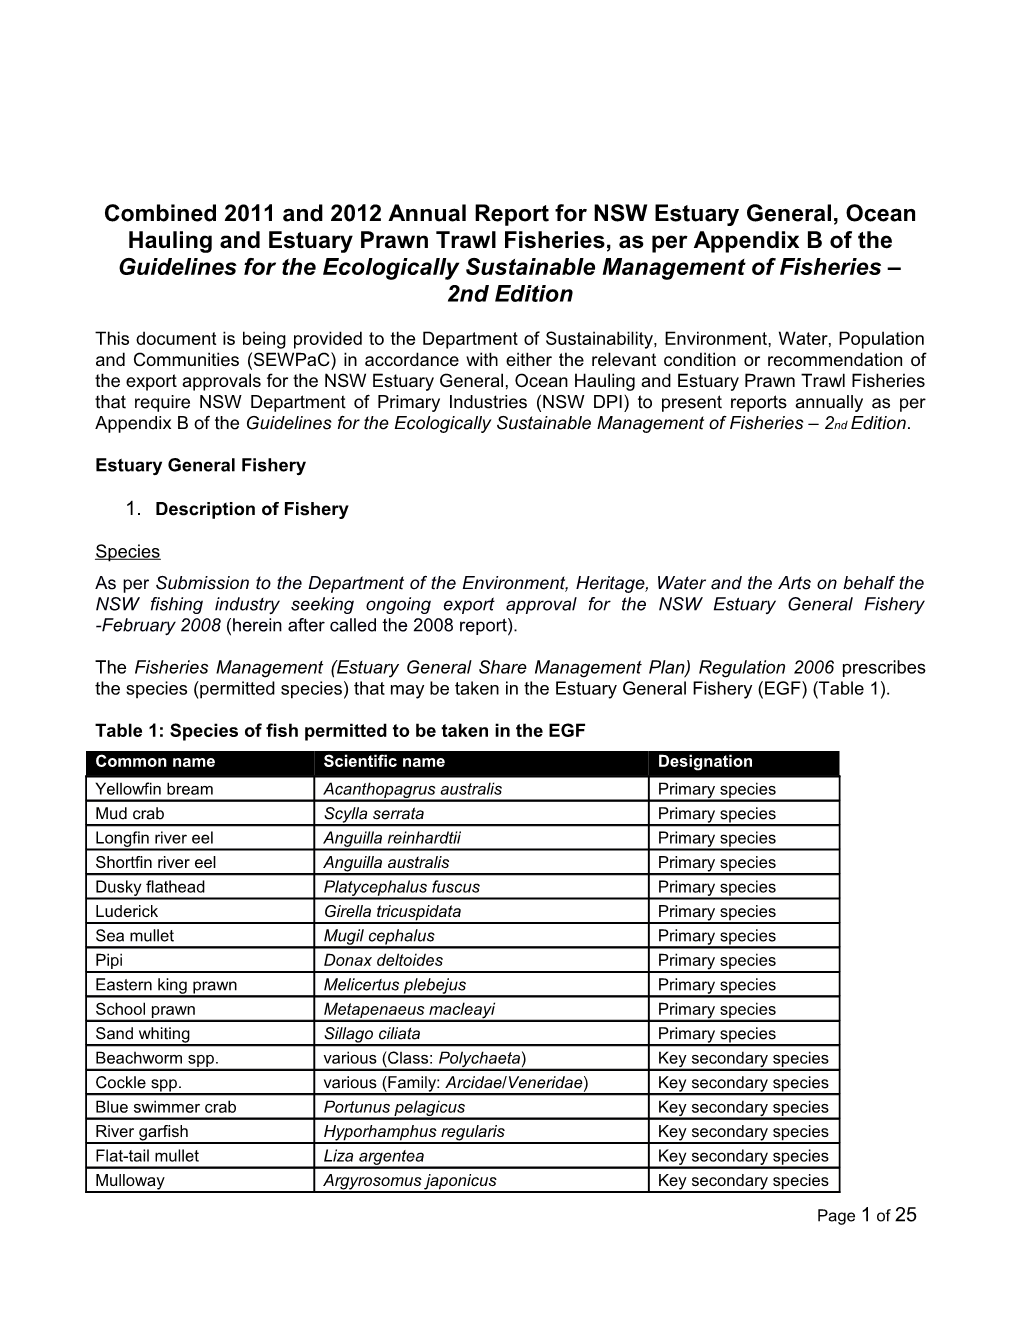 2012 Annual Report for NSW Ocean Trap and Line Fishery As Per Appendix B of the Guidelines